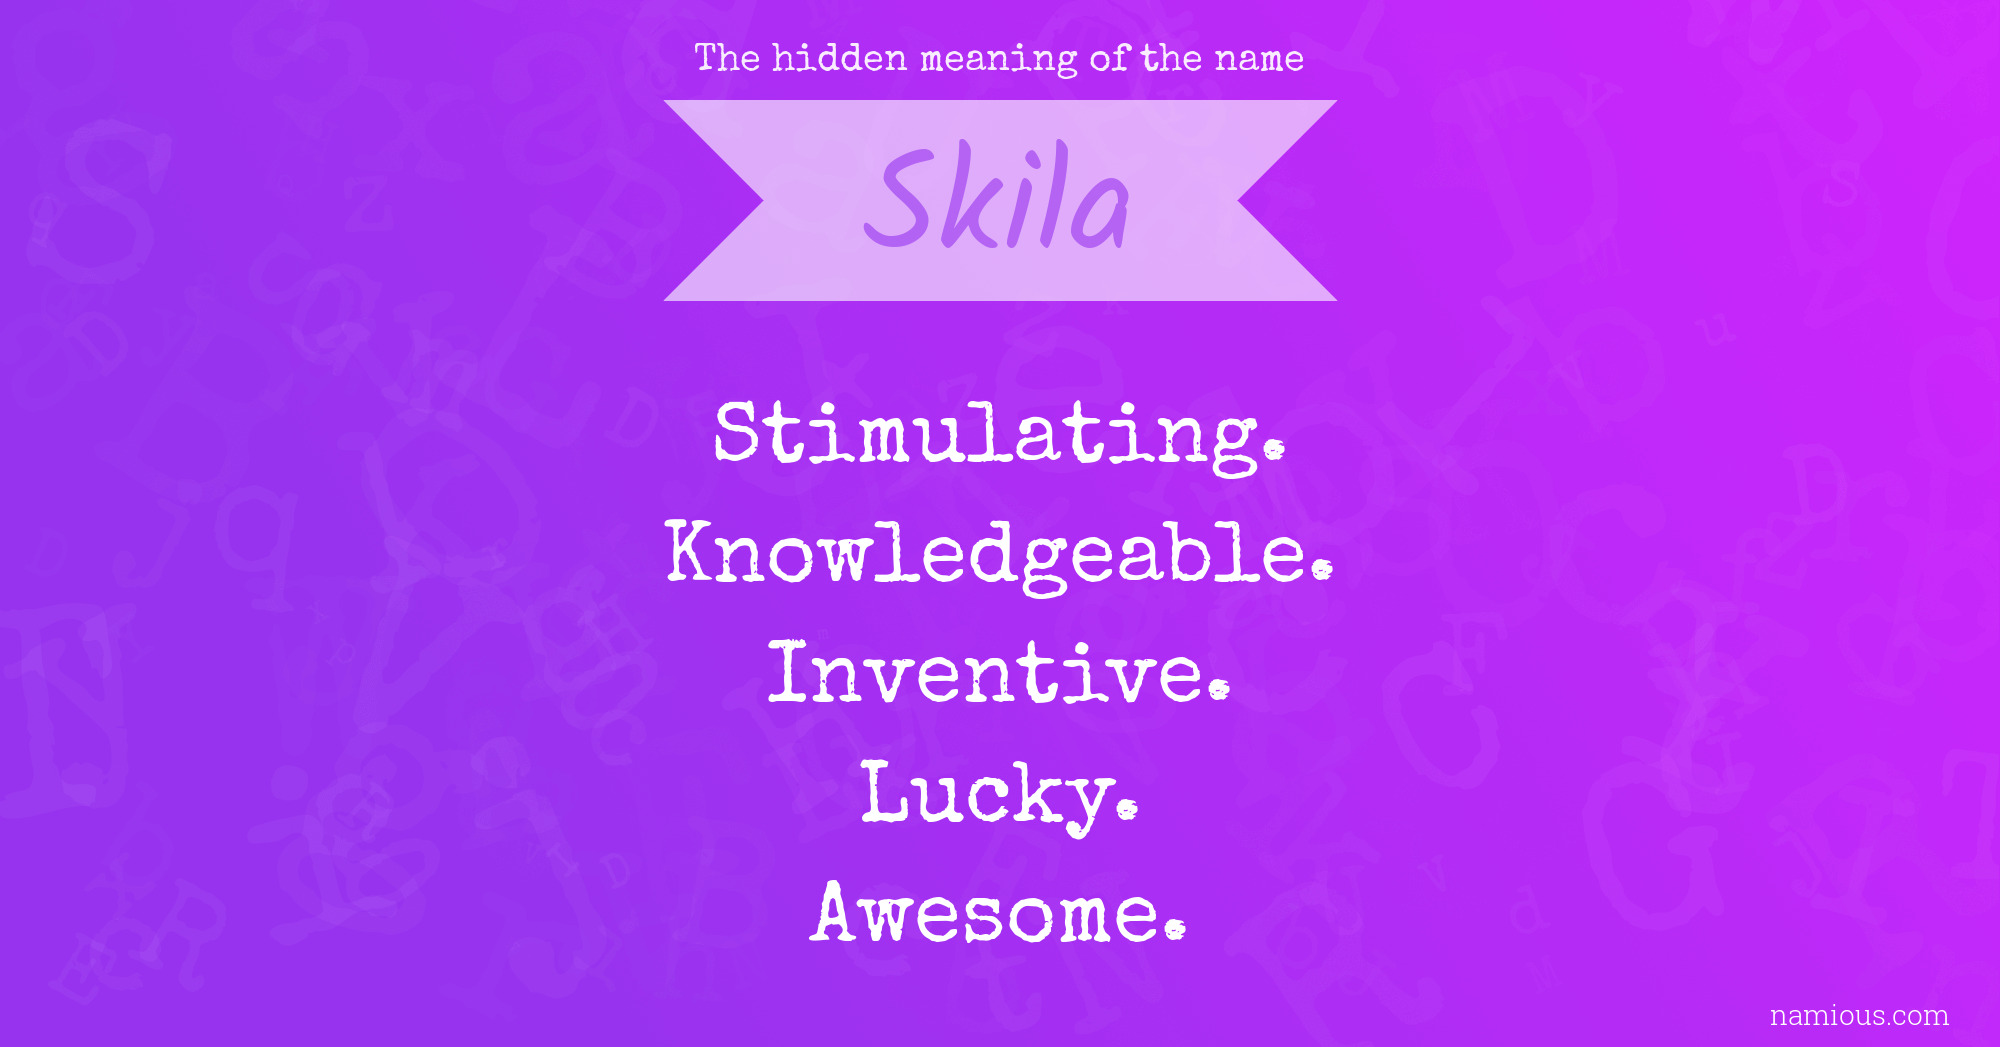 The hidden meaning of the name Skila